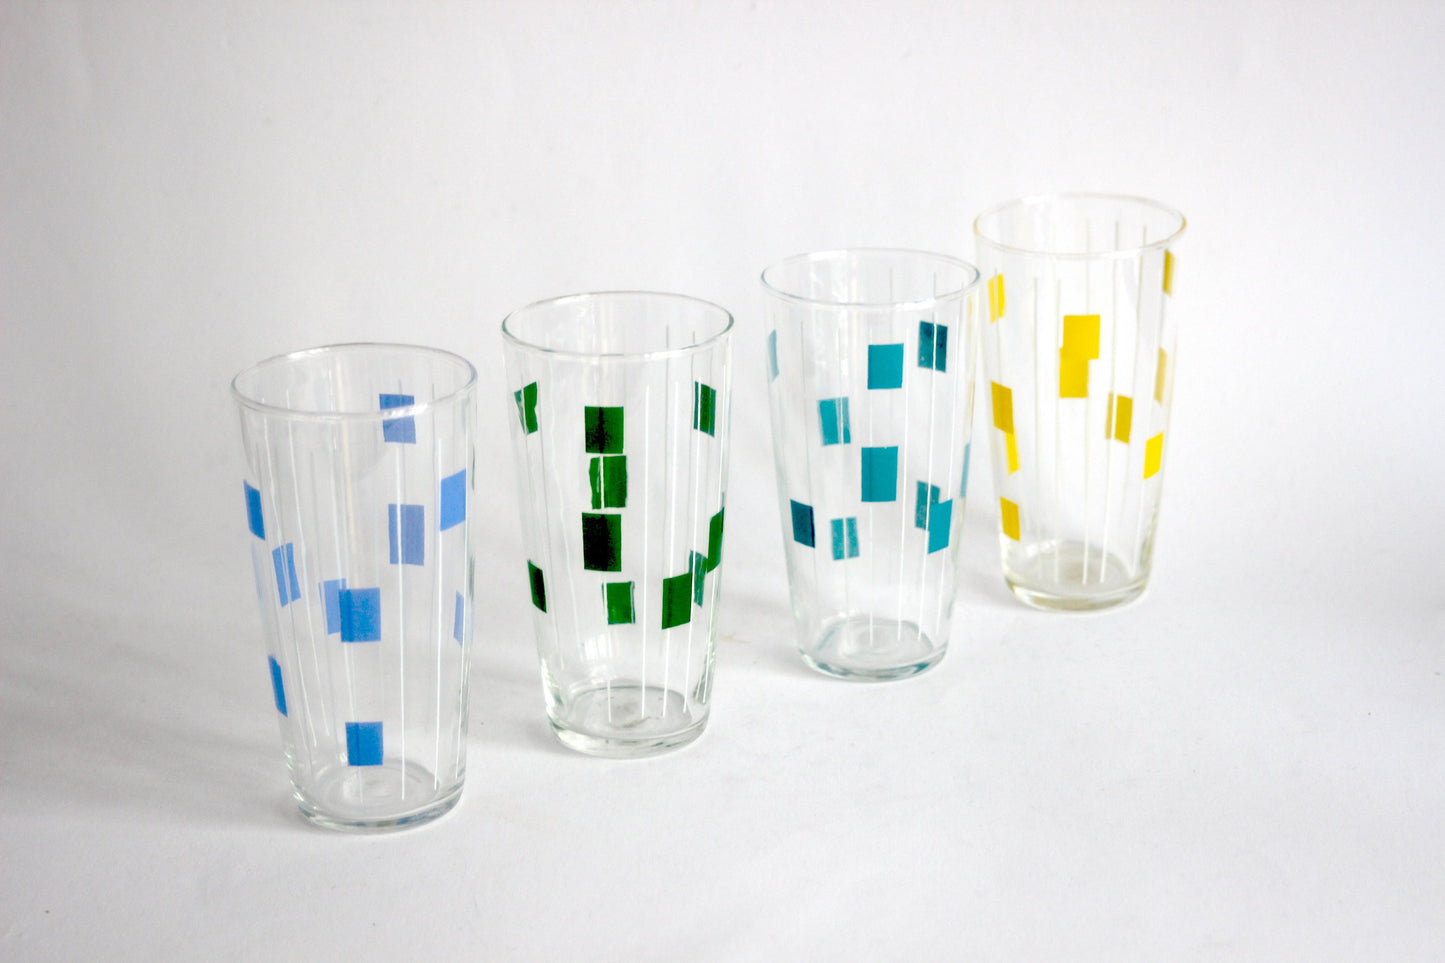 Vintage set of 4 hand-painted blown glass colorful drinking glasses, water glasses or tumbler glasses. Mid-century Austria 1950s.